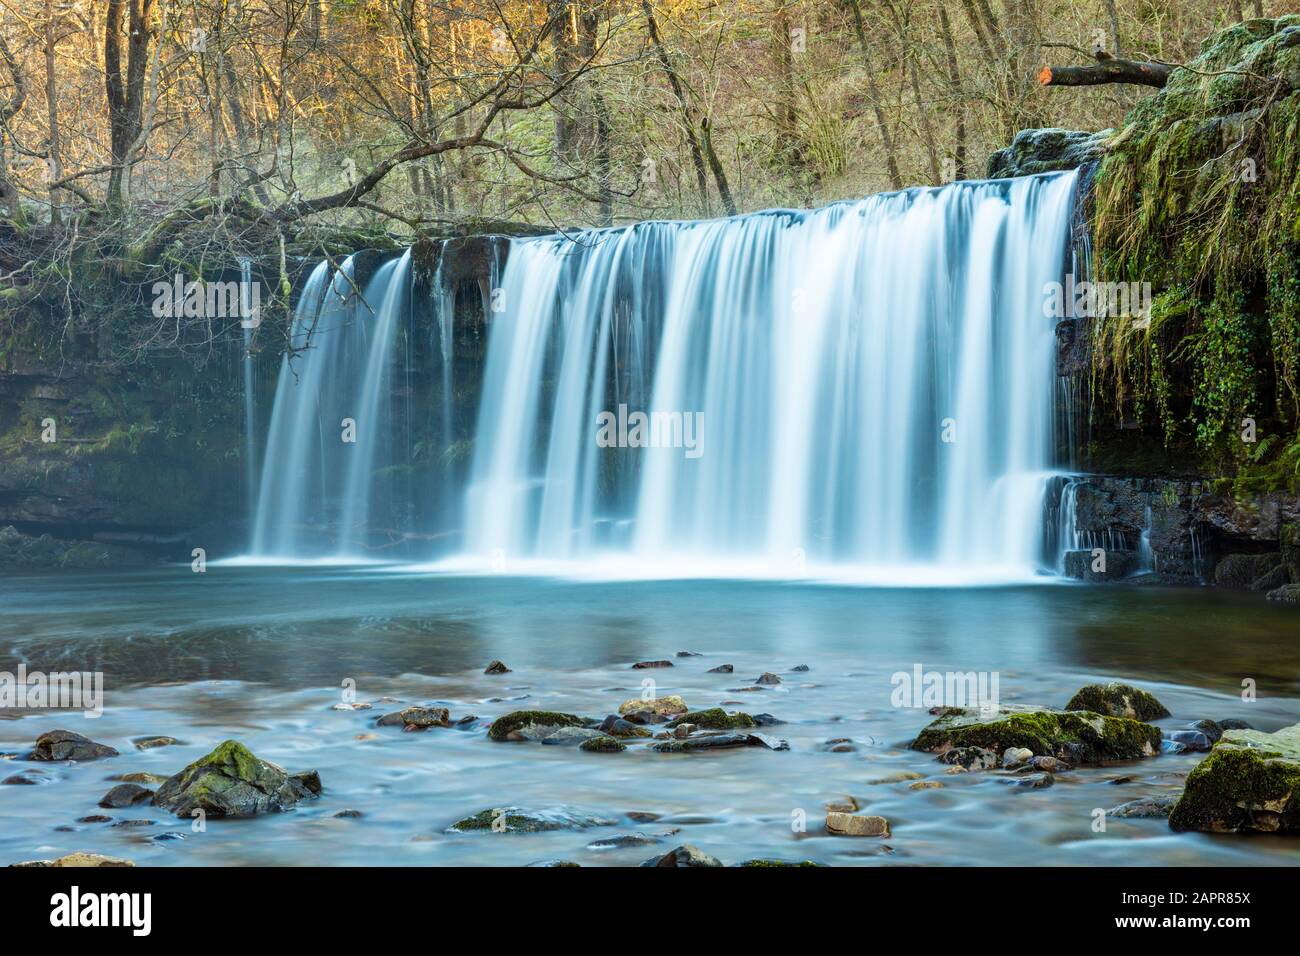 Sgwd Ddwli Uchaf waterfall or The upper gushing falls on the Nedd Fechan River in the Brecon beacons National Park near Glynneath Wales UK GB Europe Stock Photo